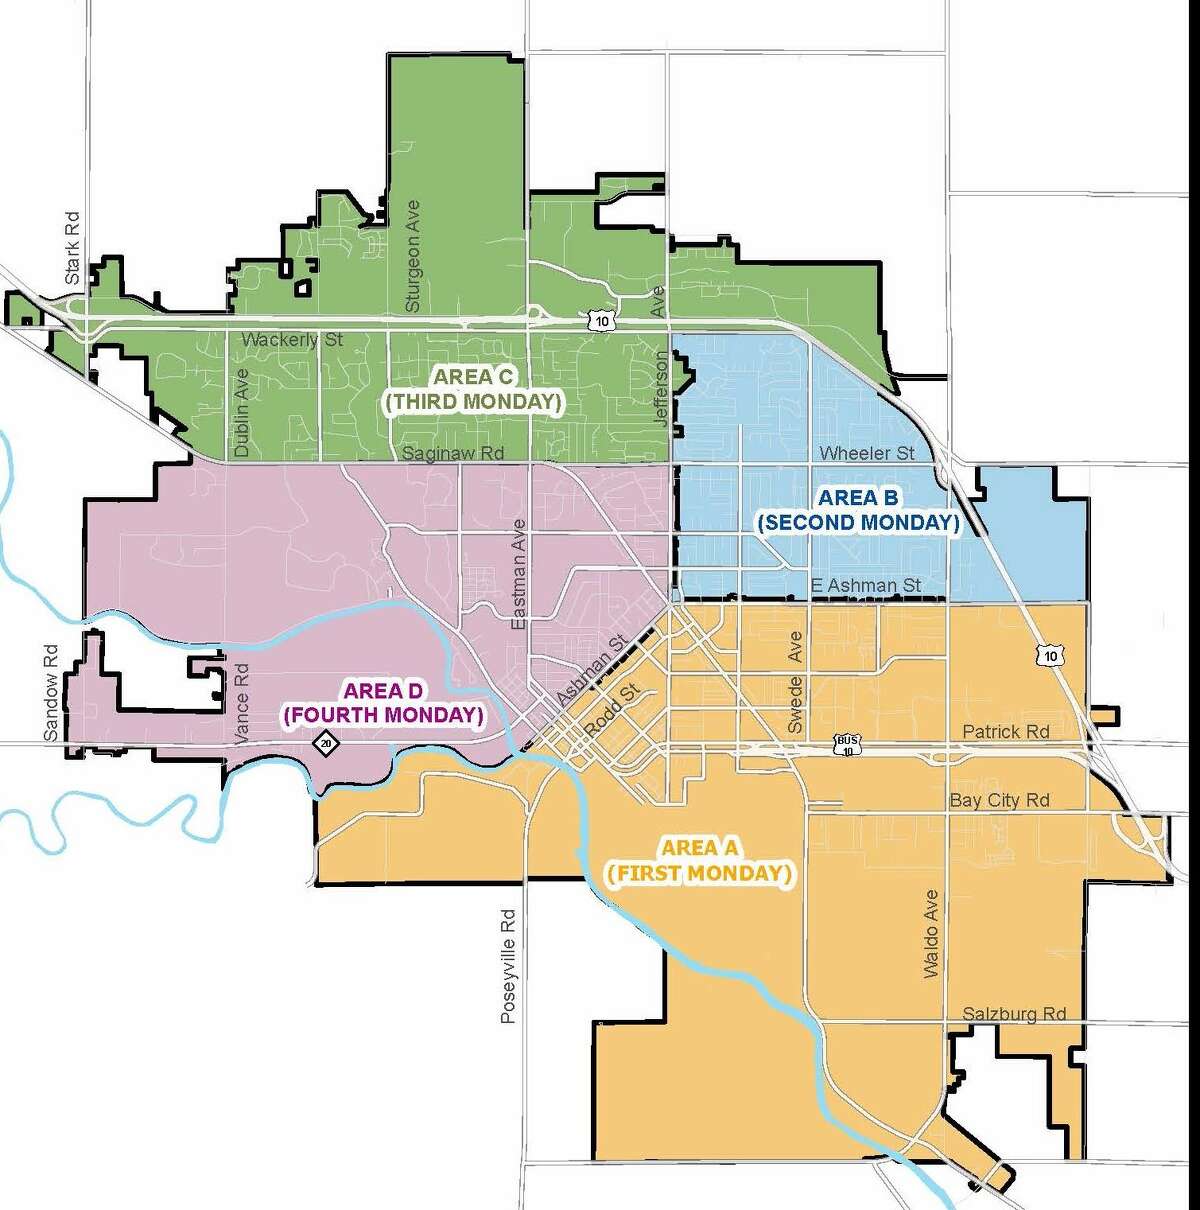 This map shows the four designated collection areas of the City of Midland. Curbside leaf collection began in Area B on Oct. 31 and will then proceed to Area C, Area D and Area A.